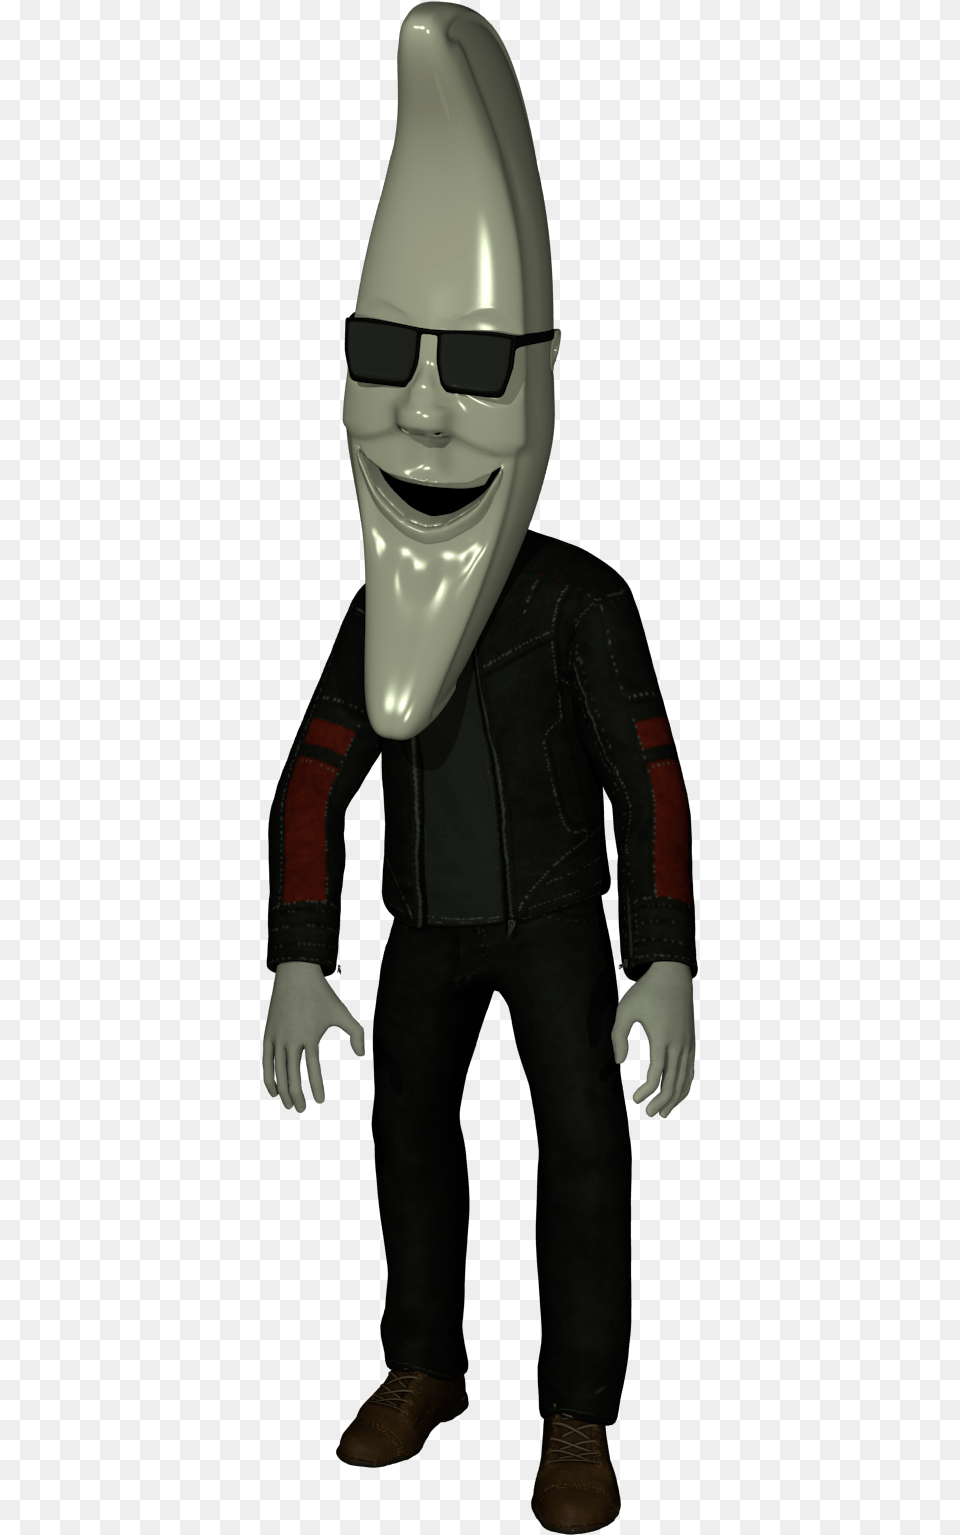 Official Five Nights With Mac Tonight Wiki Five Nights With Bud Rebooted, Accessories, Sunglasses, Person, Helmet Free Transparent Png